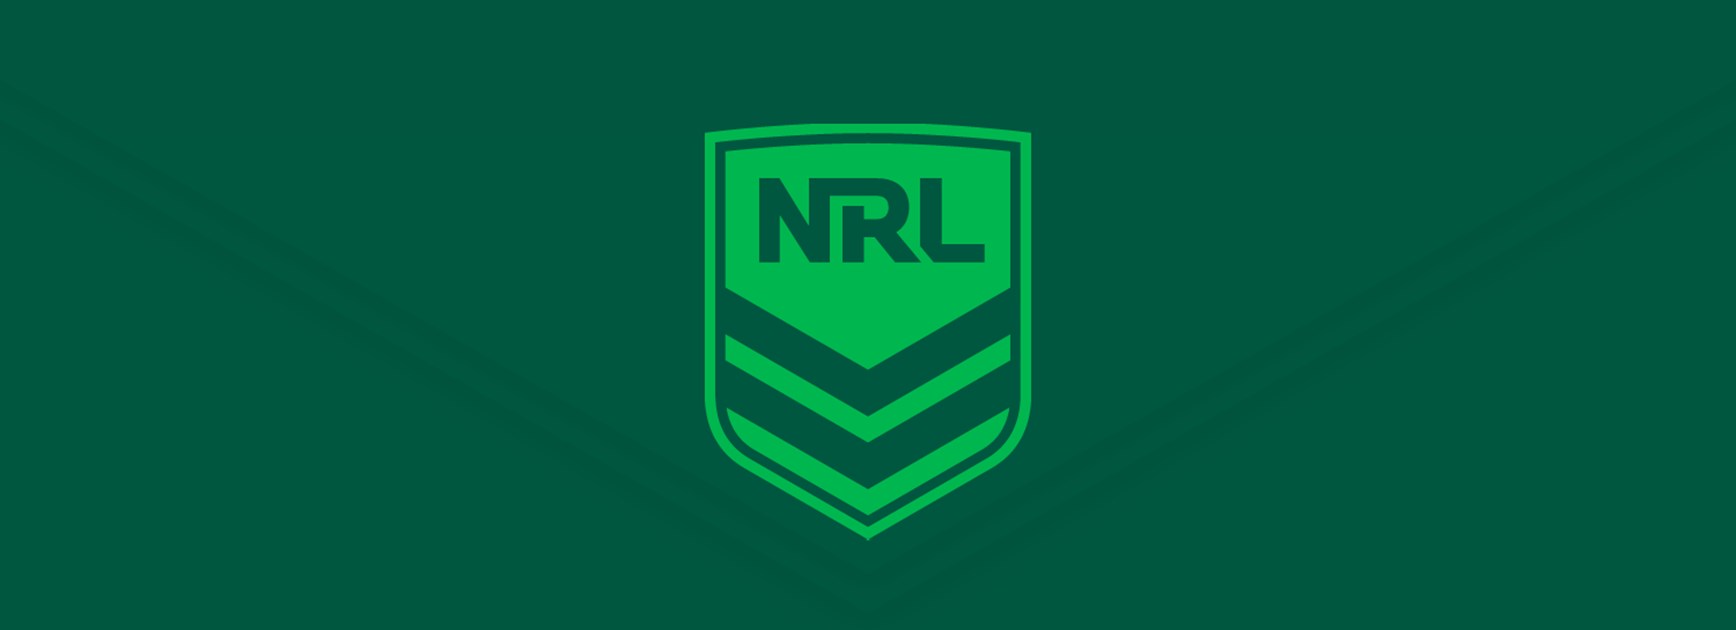 NRL appoints chief corporate affairs officer